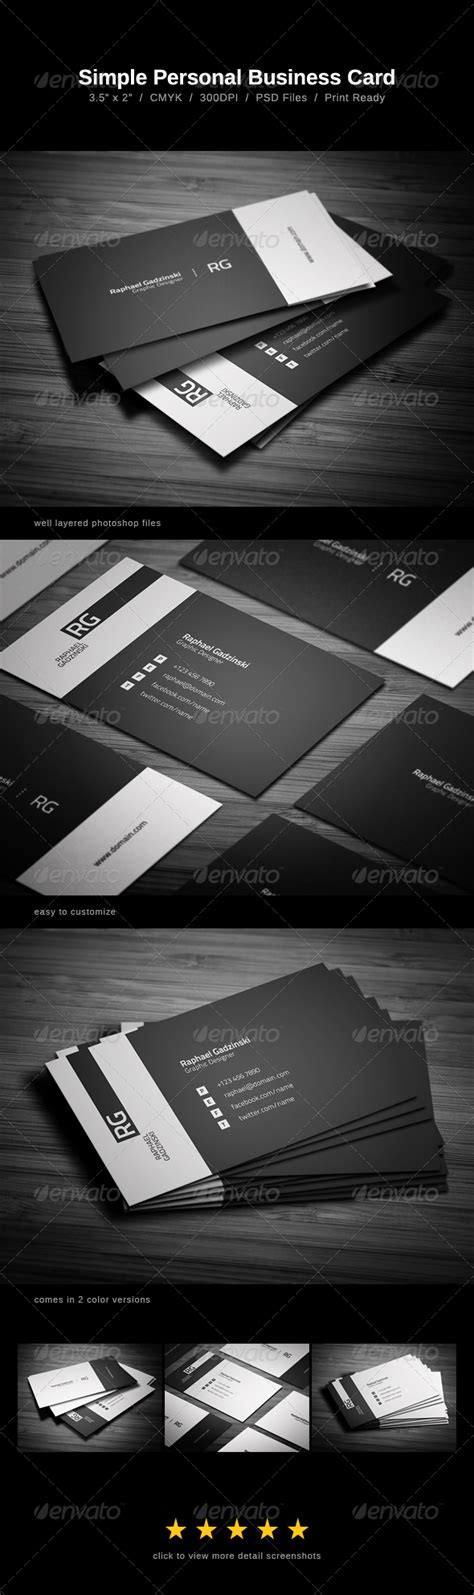 Simple Business Card by FlowPixels | GraphicRiver